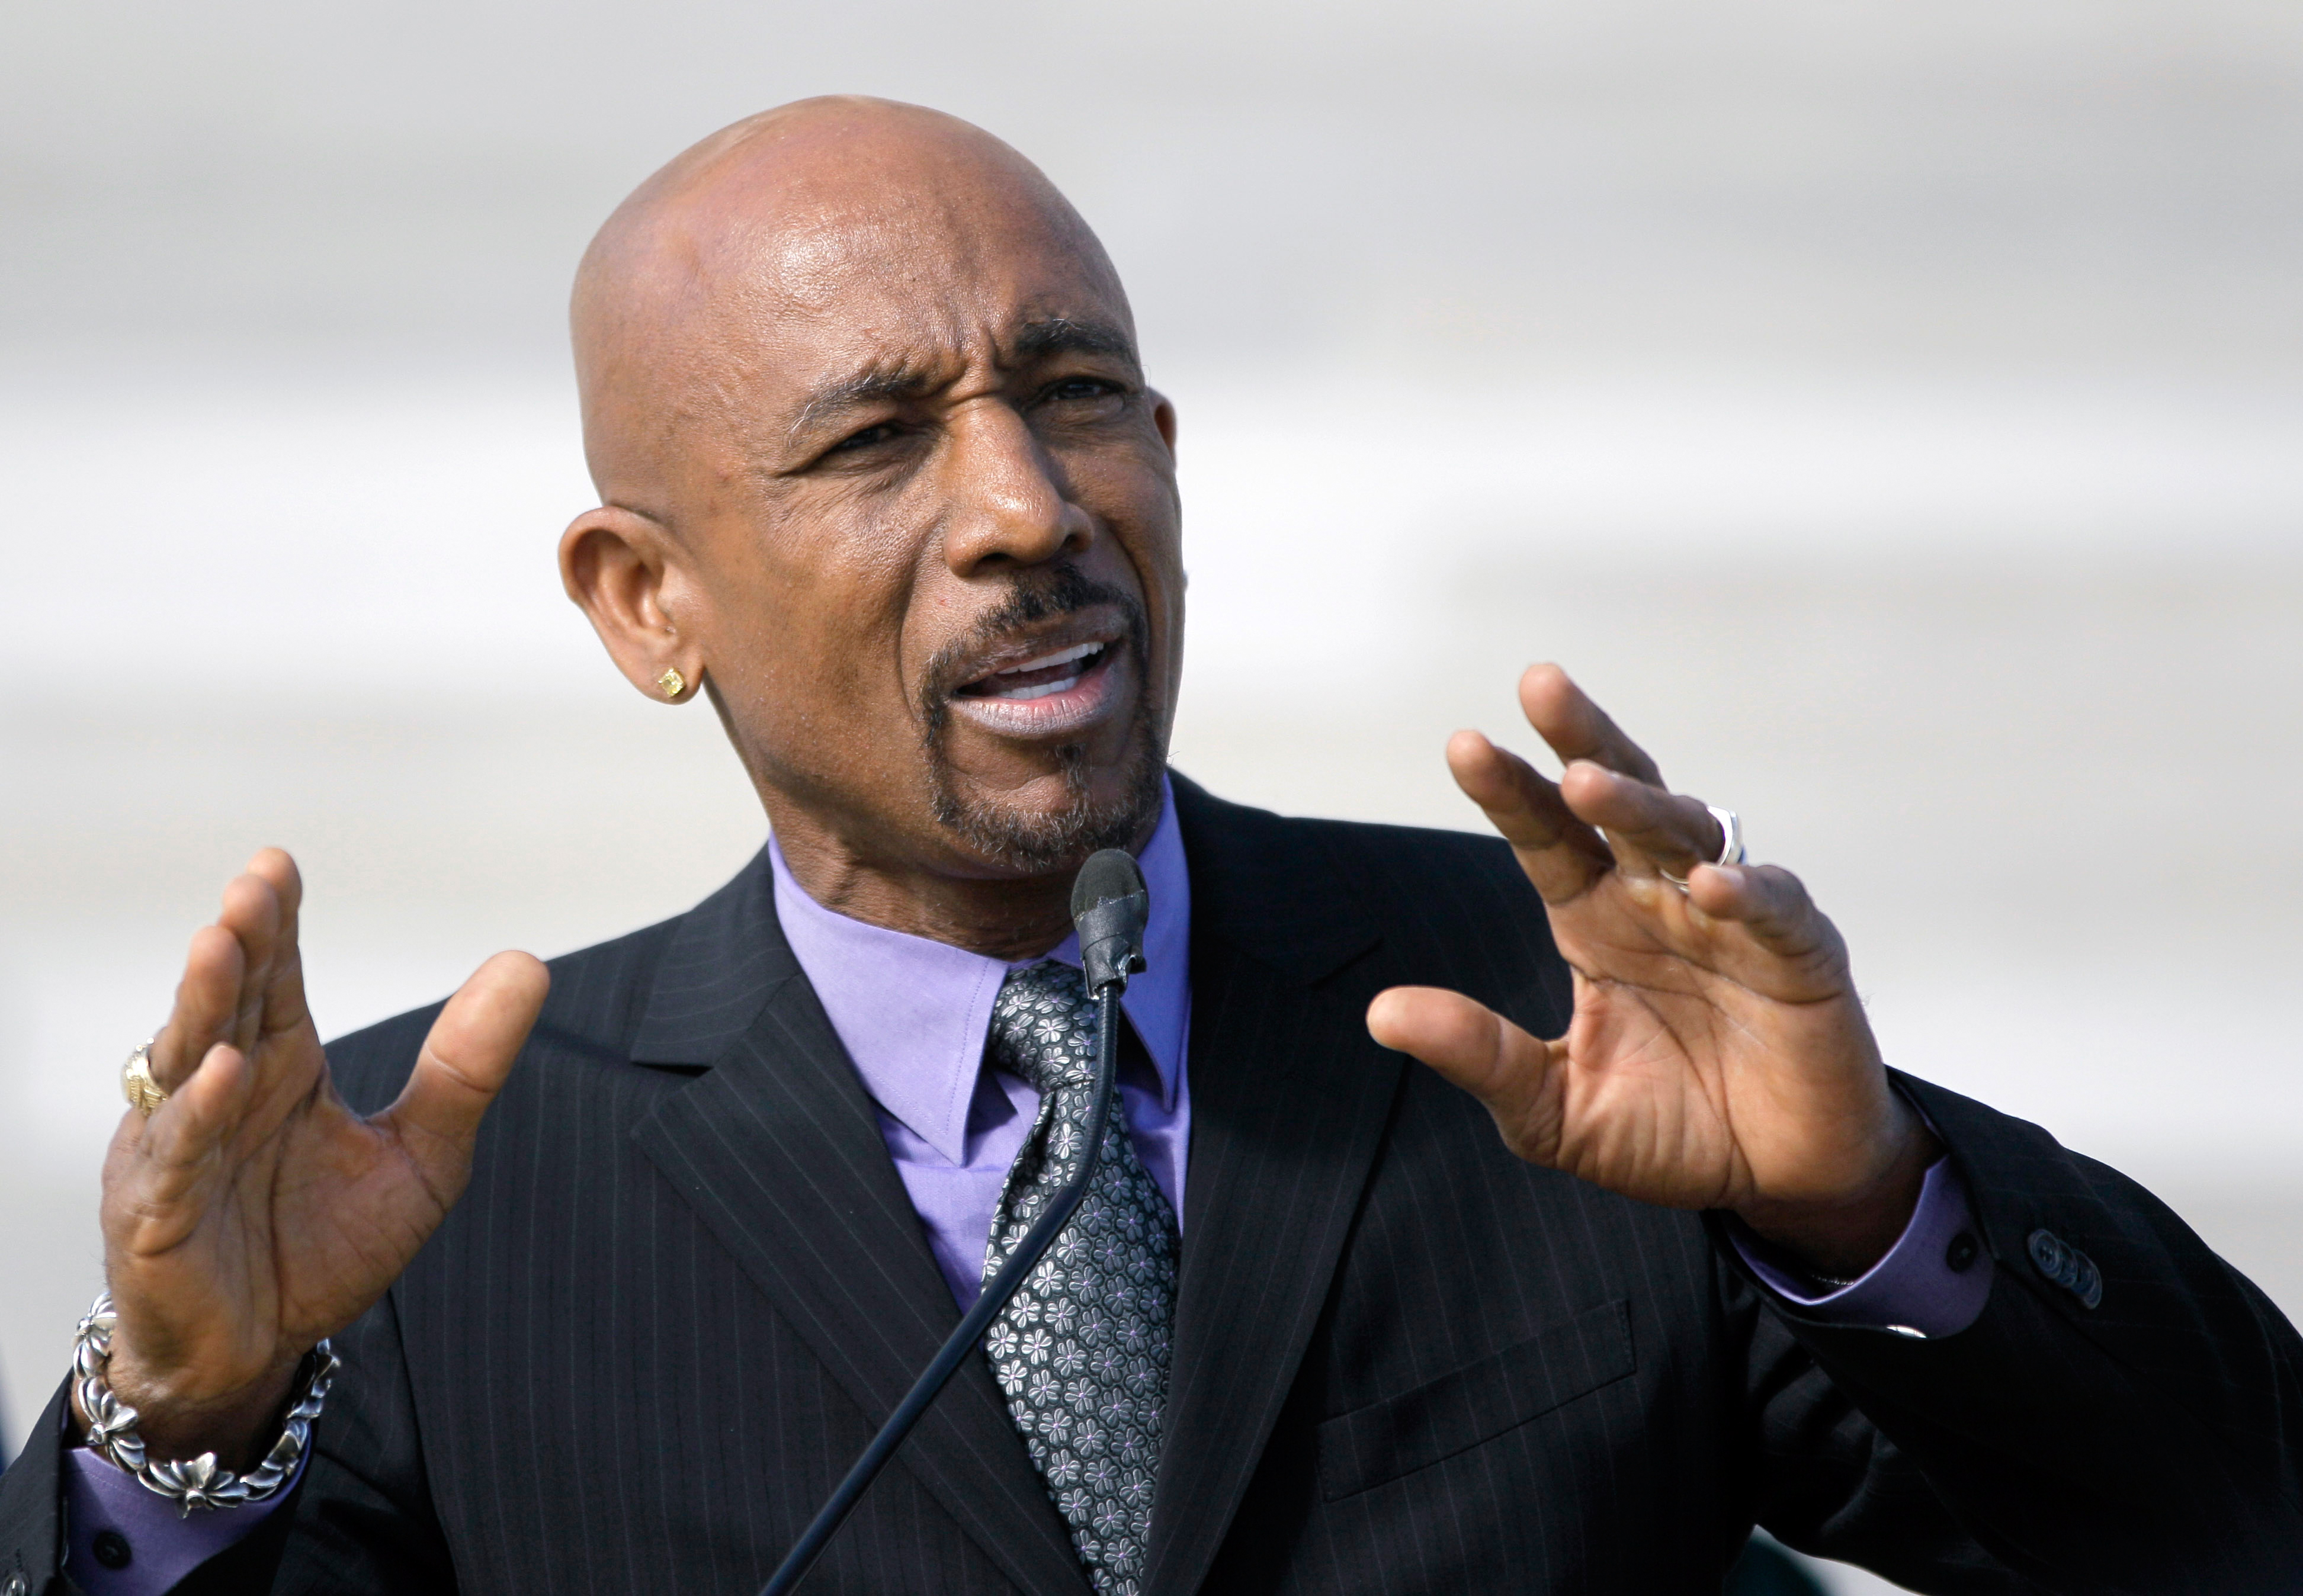 Payday Loan Company Endorsed by Montel Williams Is Fined for Misconduct